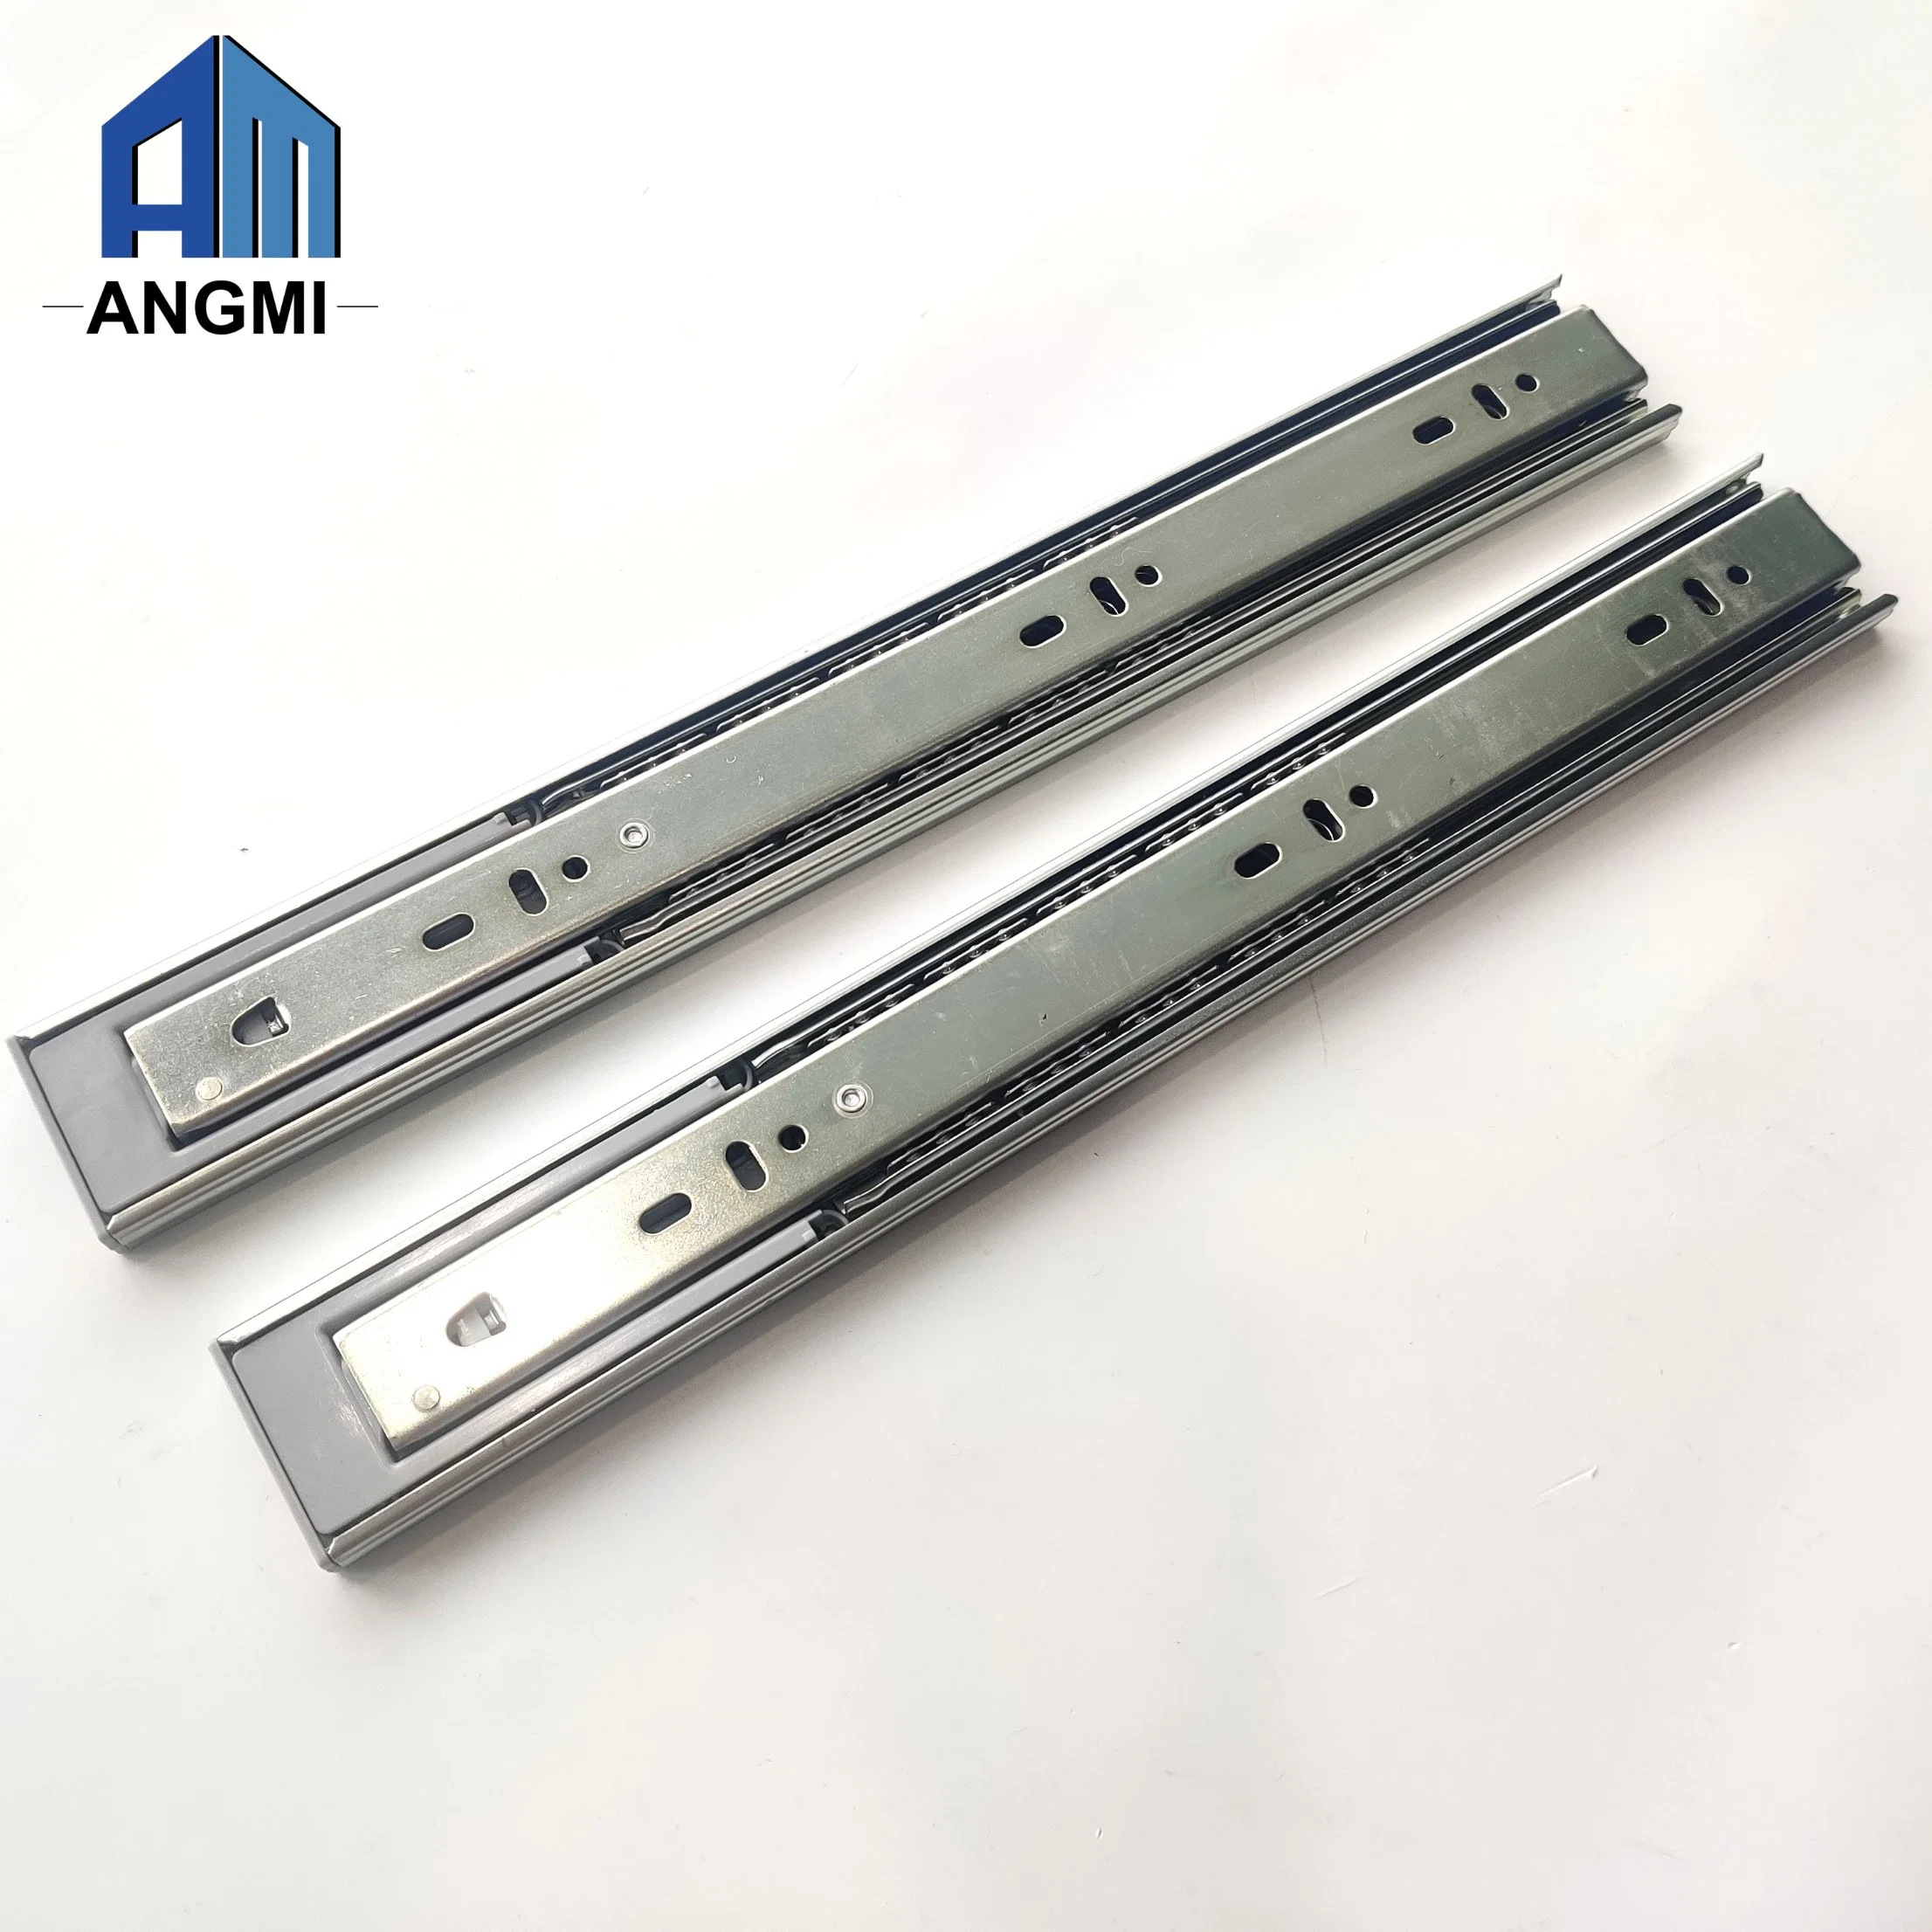 Industrial Ball Bearing Furniture Table Hardware Drawer Slides Accessories with Locking